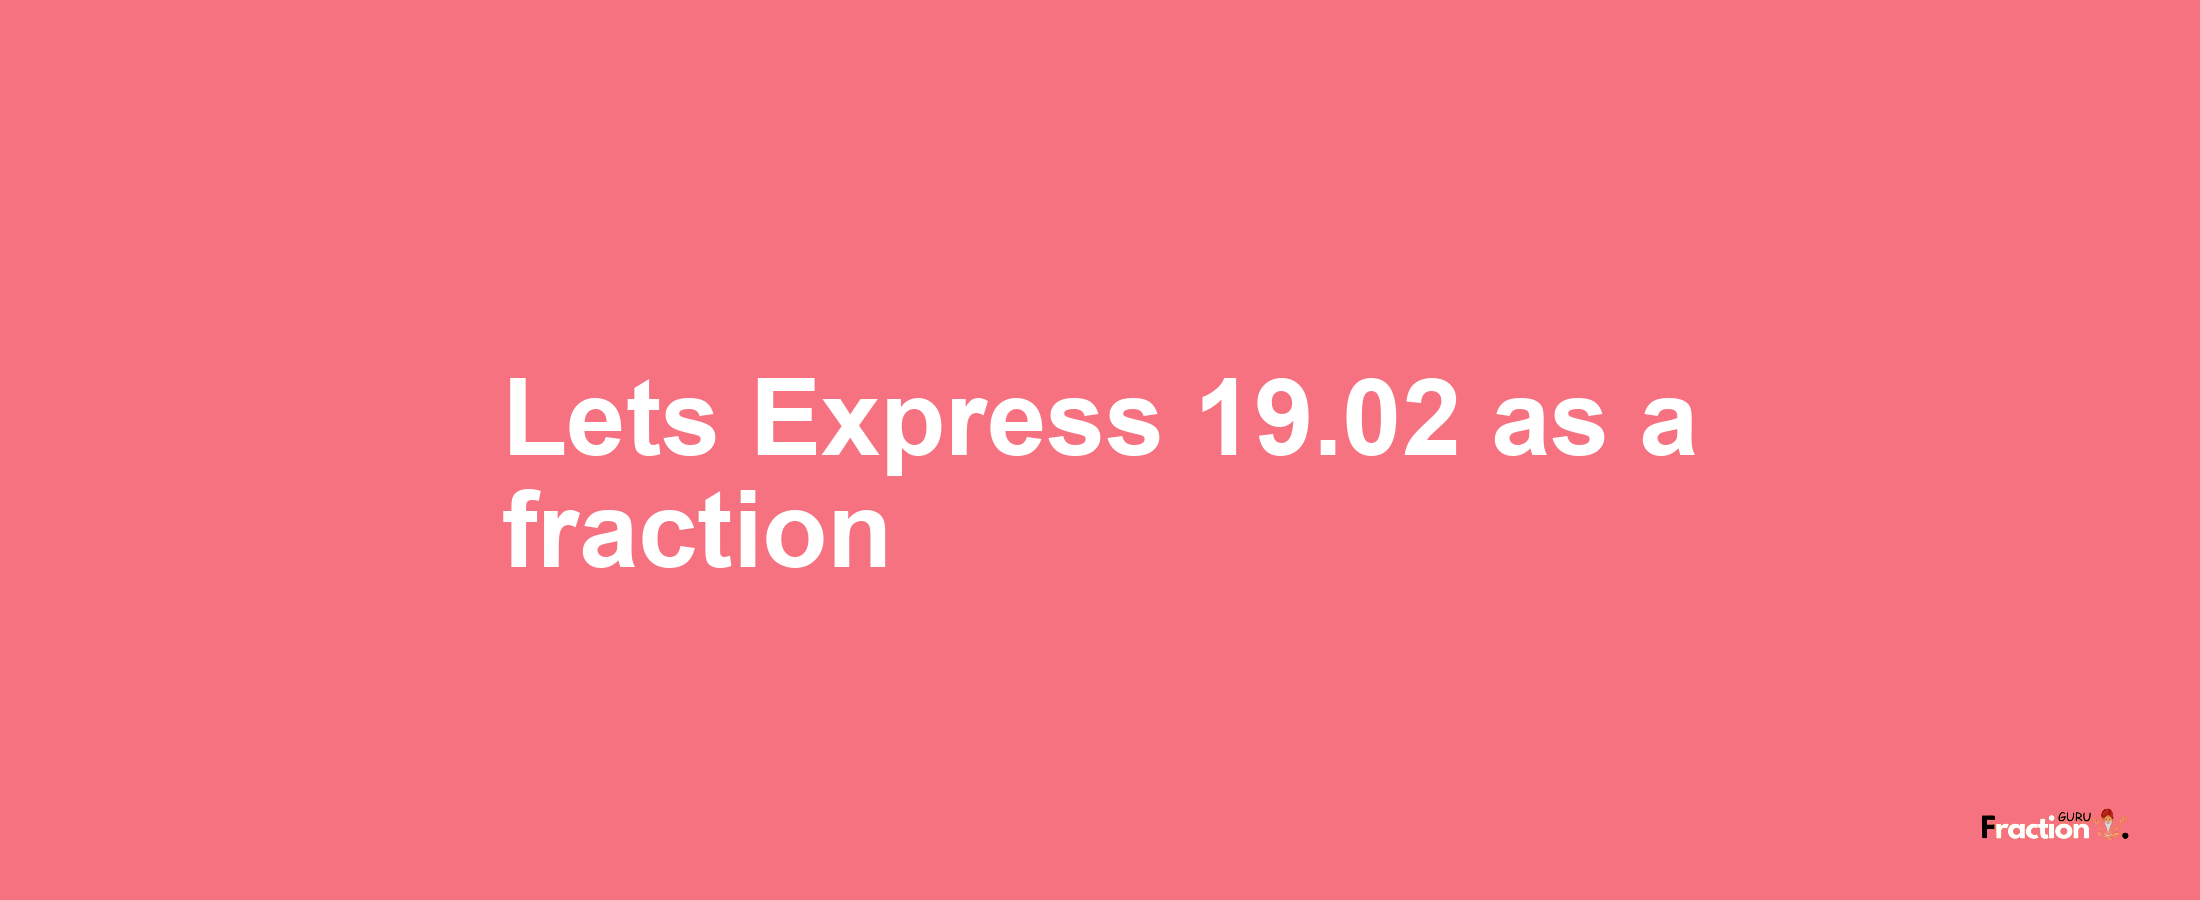 Lets Express 19.02 as afraction